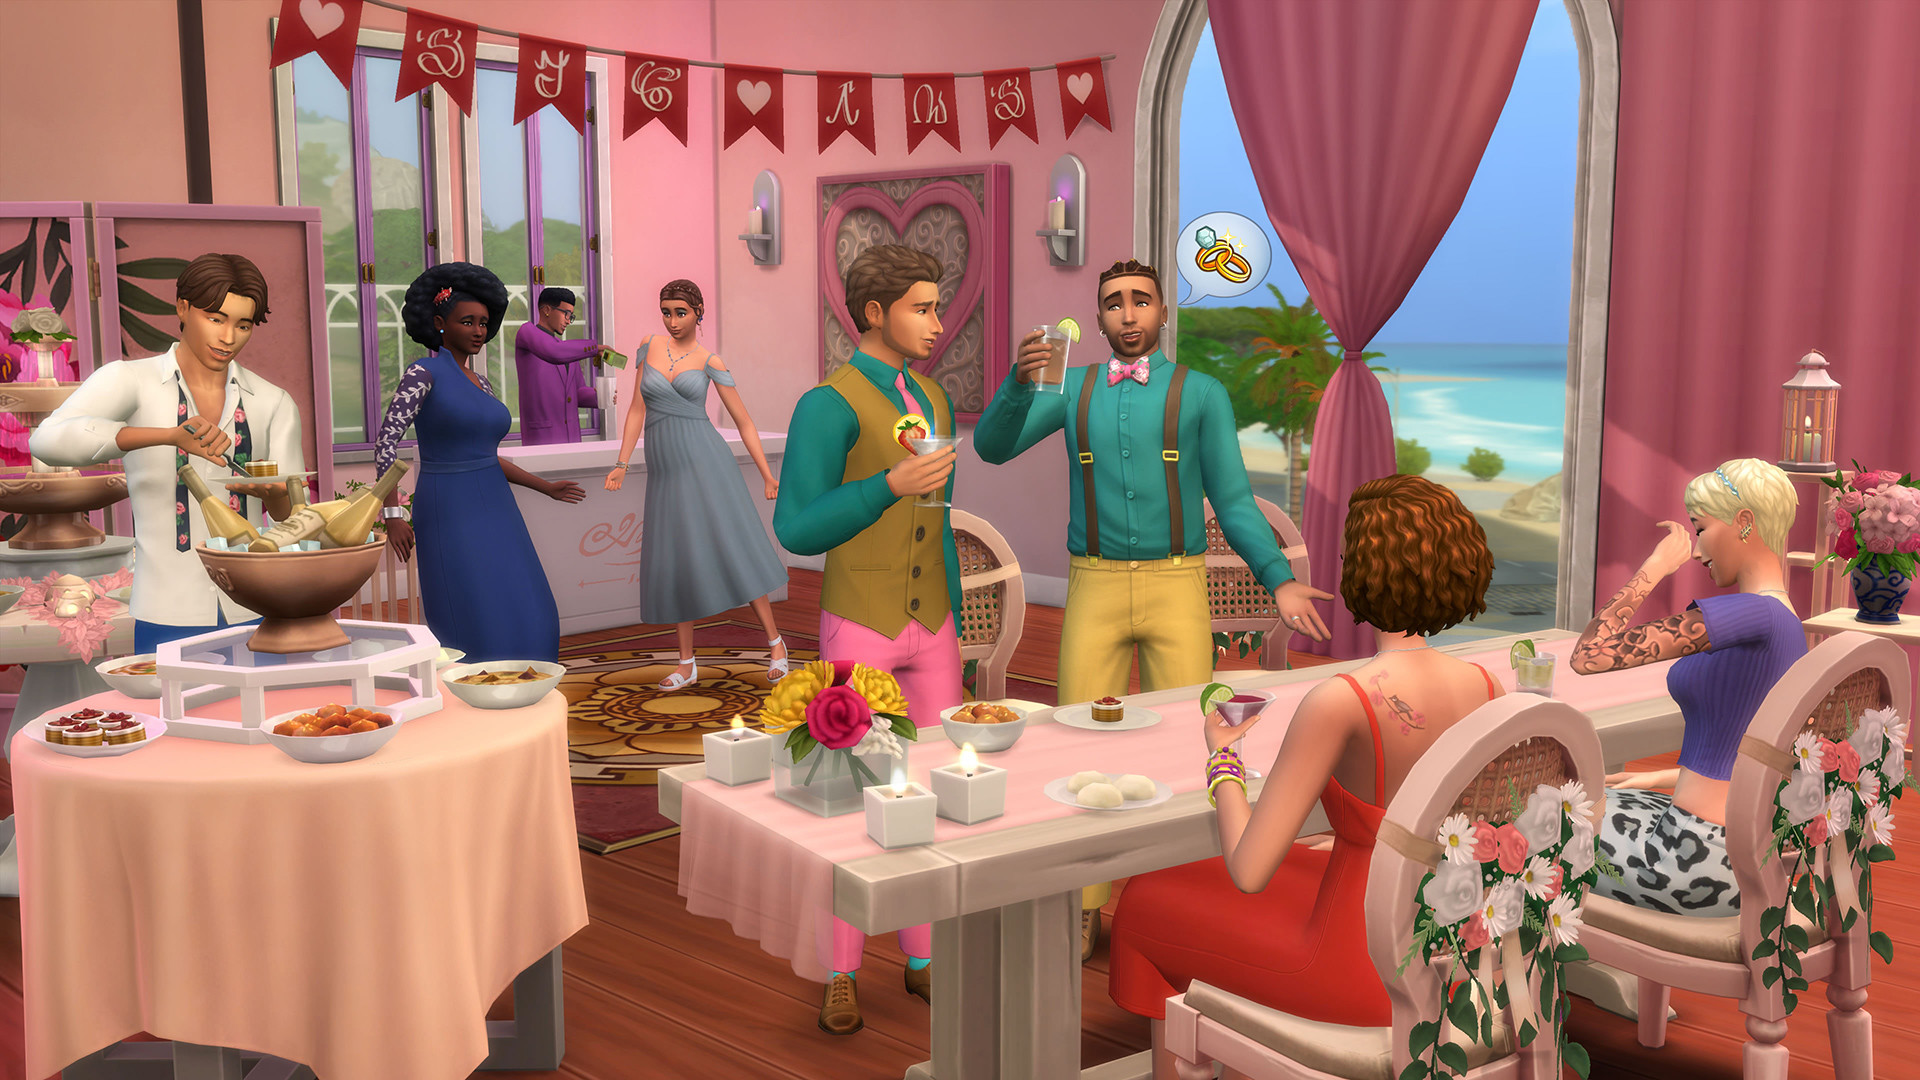 The Sims 4 - My Wedding Stories Game Pack DLC Steam Altergift [$ 25.82]